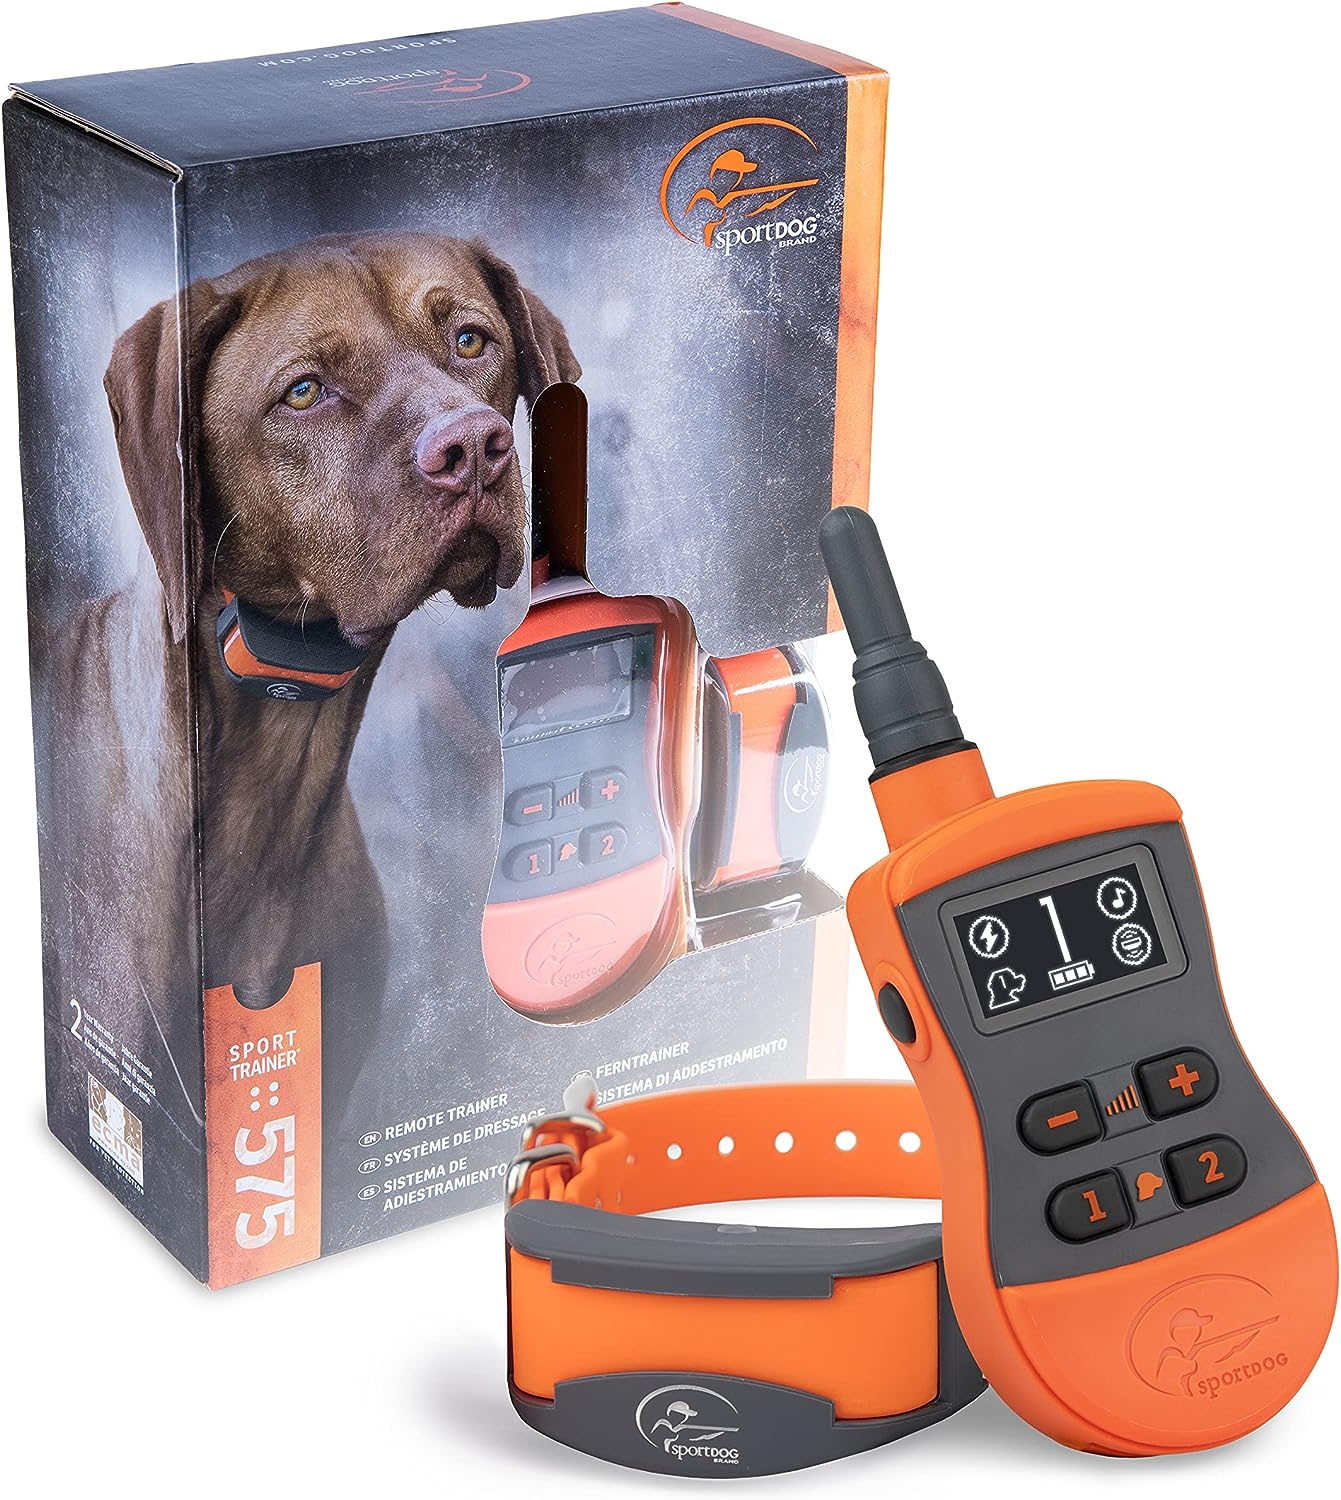 SportDOG Brand SportTrainer Remote Trainers - Bright, Easy to Read OLED Screen - Waterproof, Rechargeable Dog Training Collar with Tone, Vibration, and Static, 500 Yard Range - 2 Dog Expandable